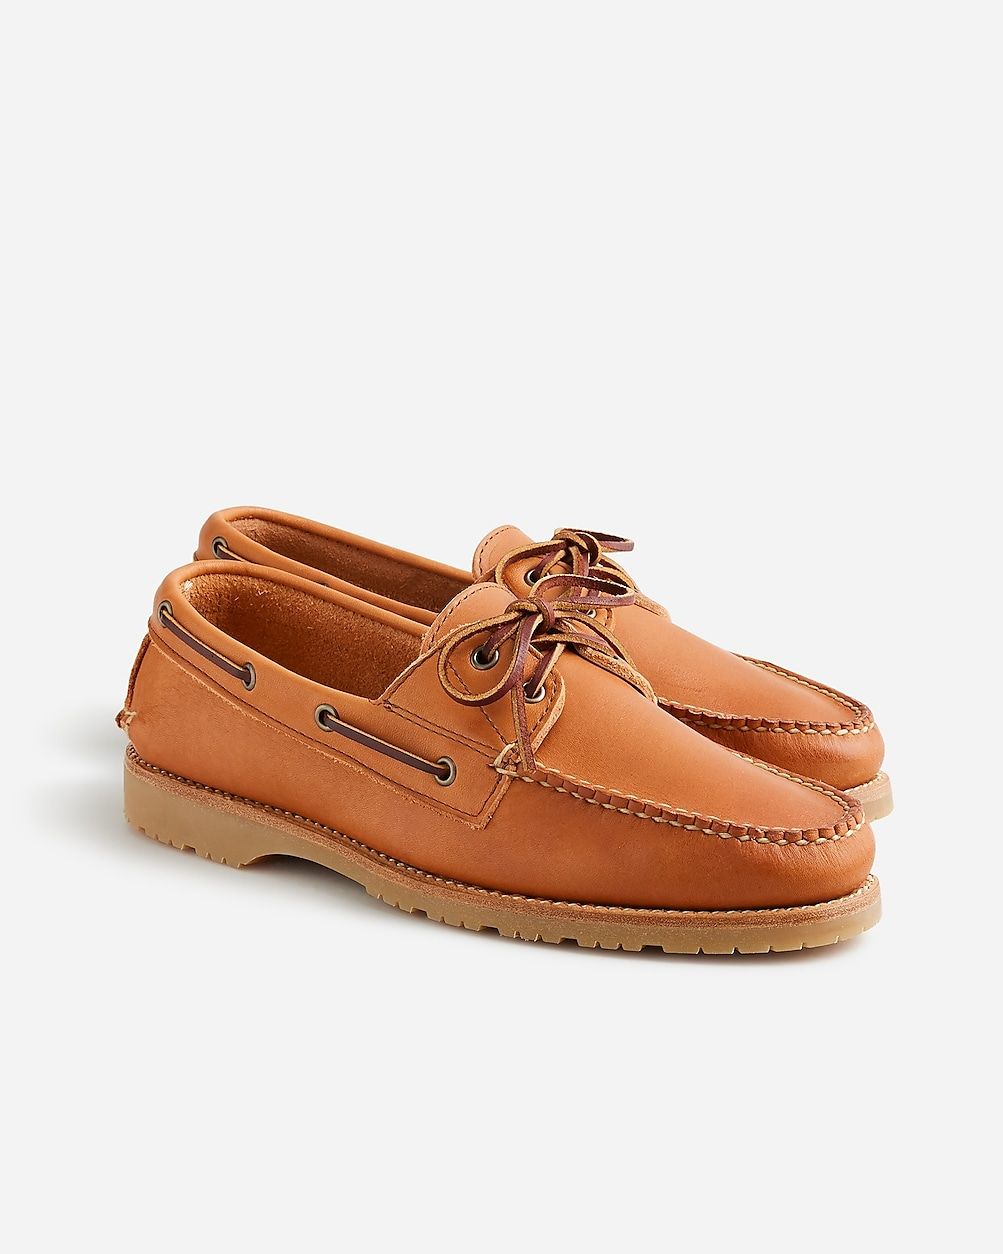 Rancourt & Co. X J.Crew Read boat shoes with lug sole | J.Crew US